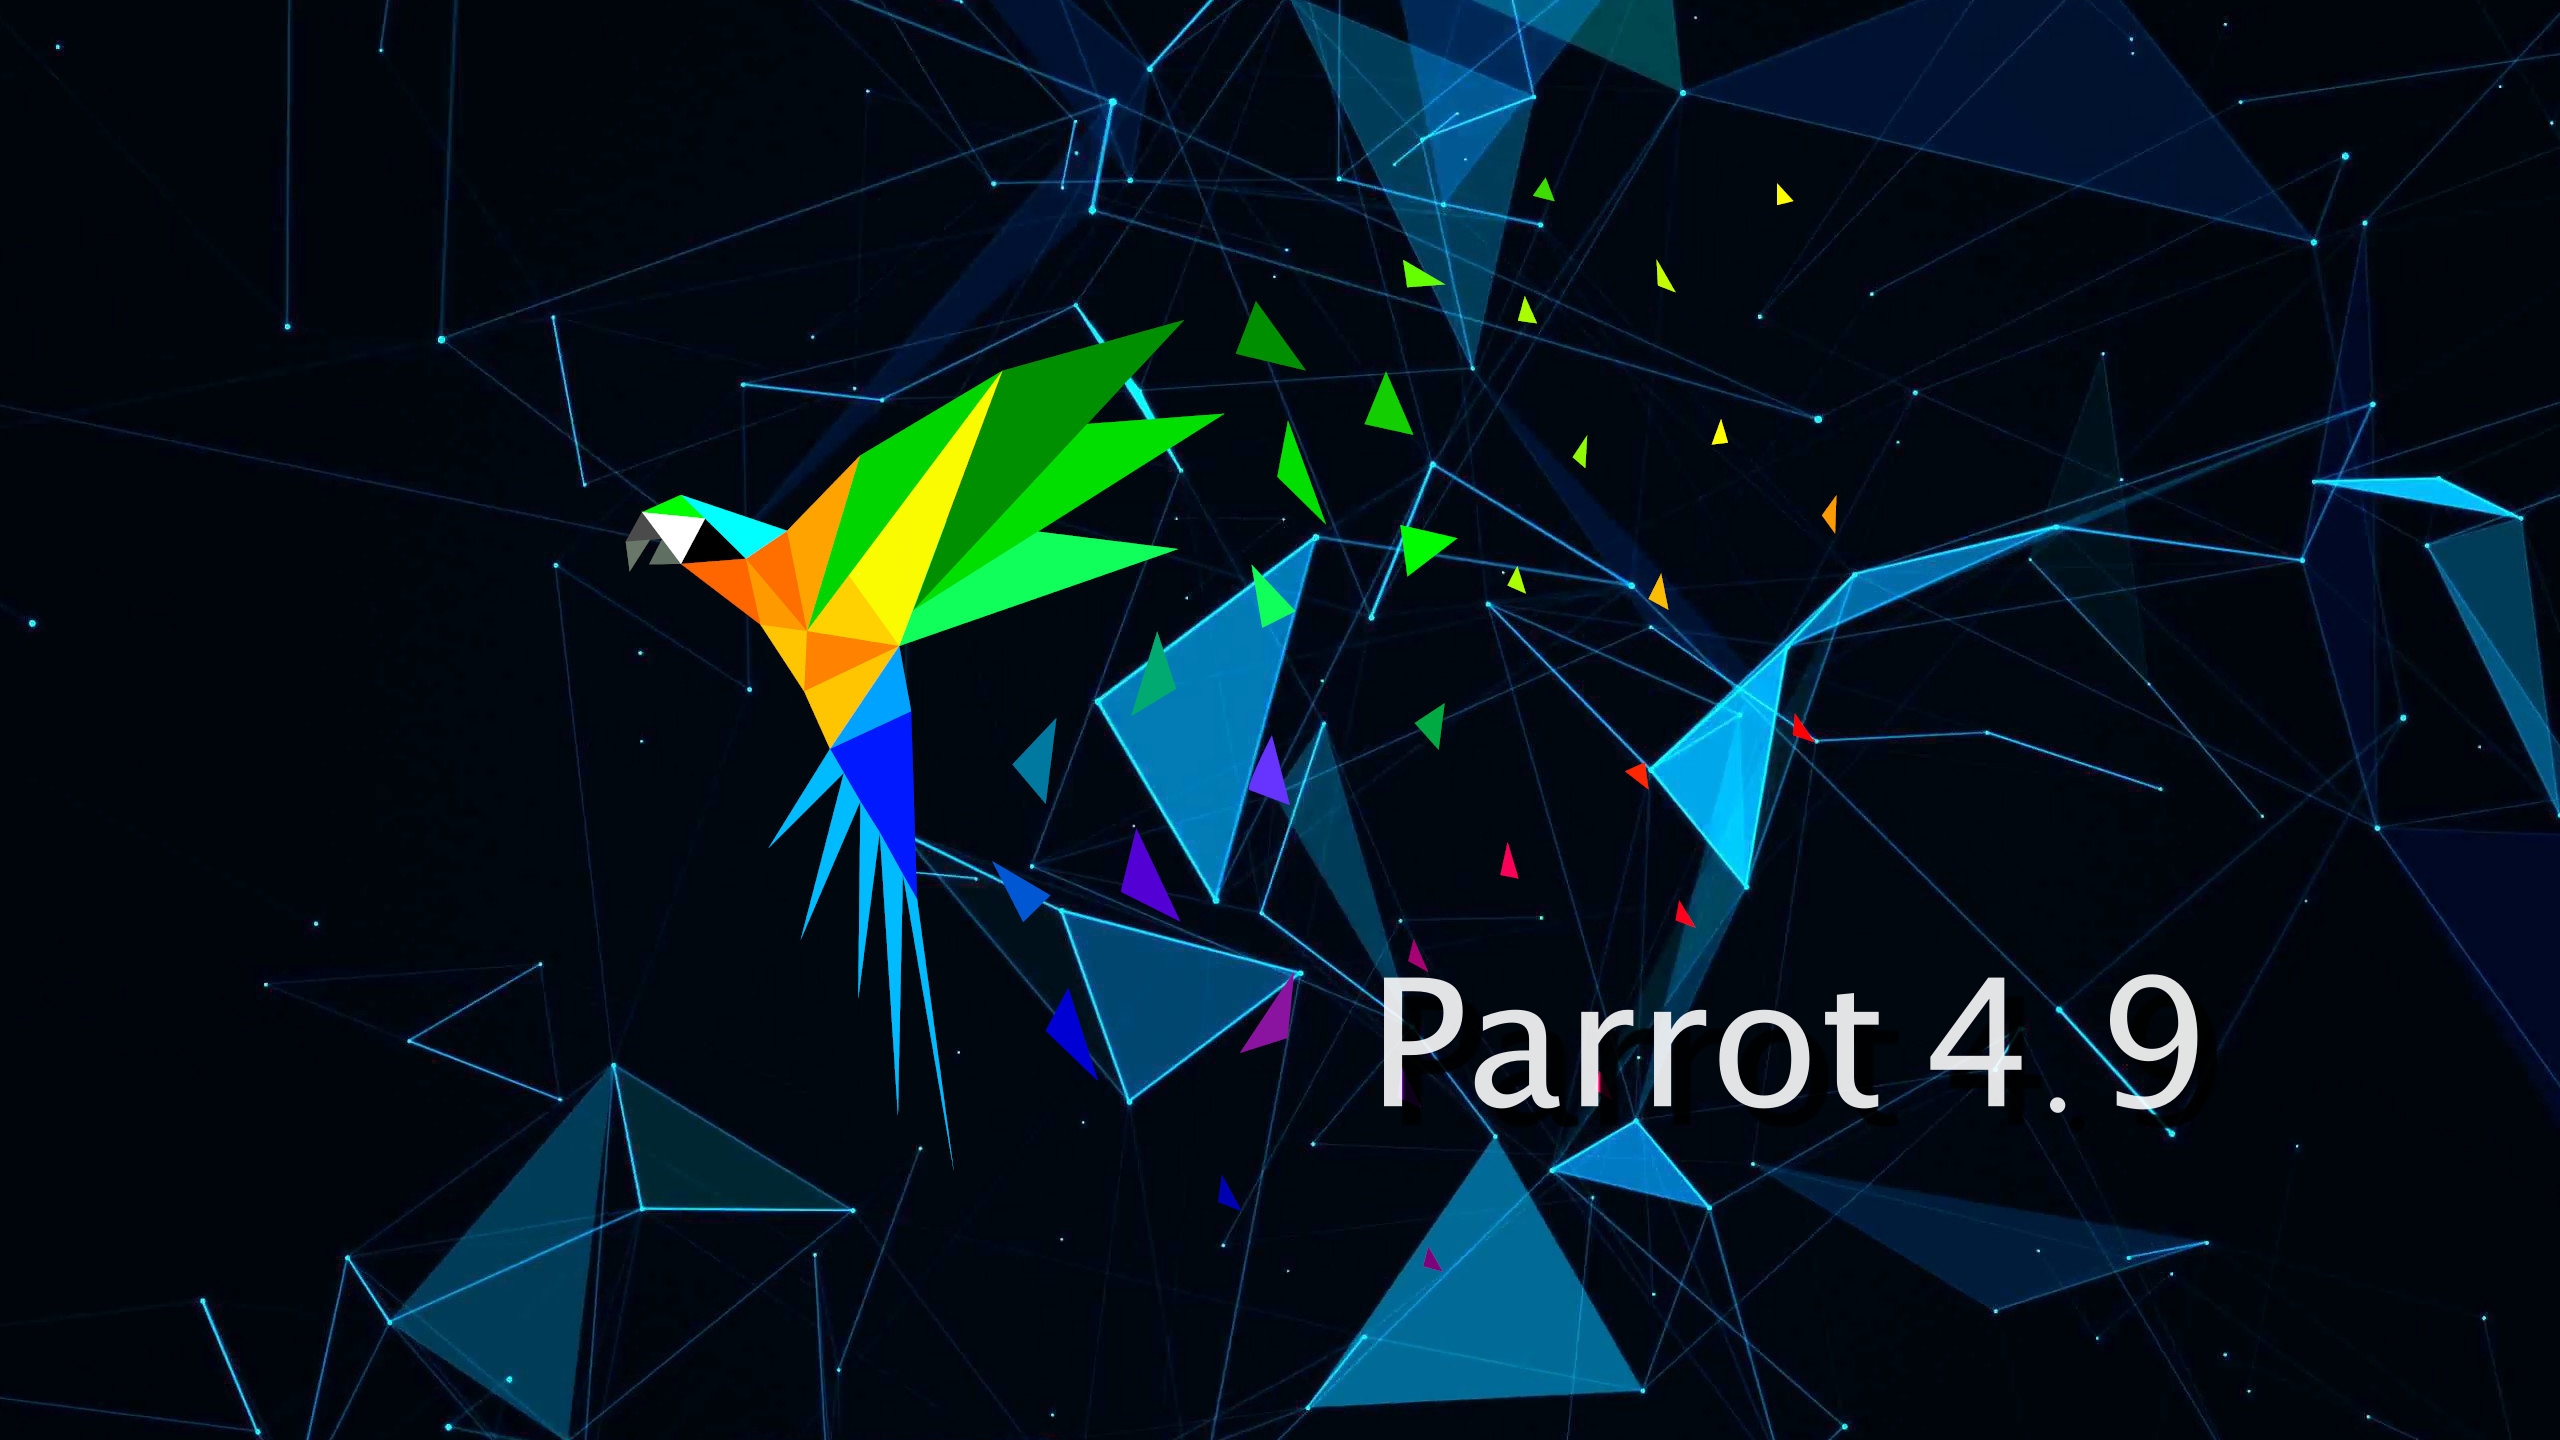 Parrot 4.9 Security OS Arrives with Linux Kernel 5.5, New Installer